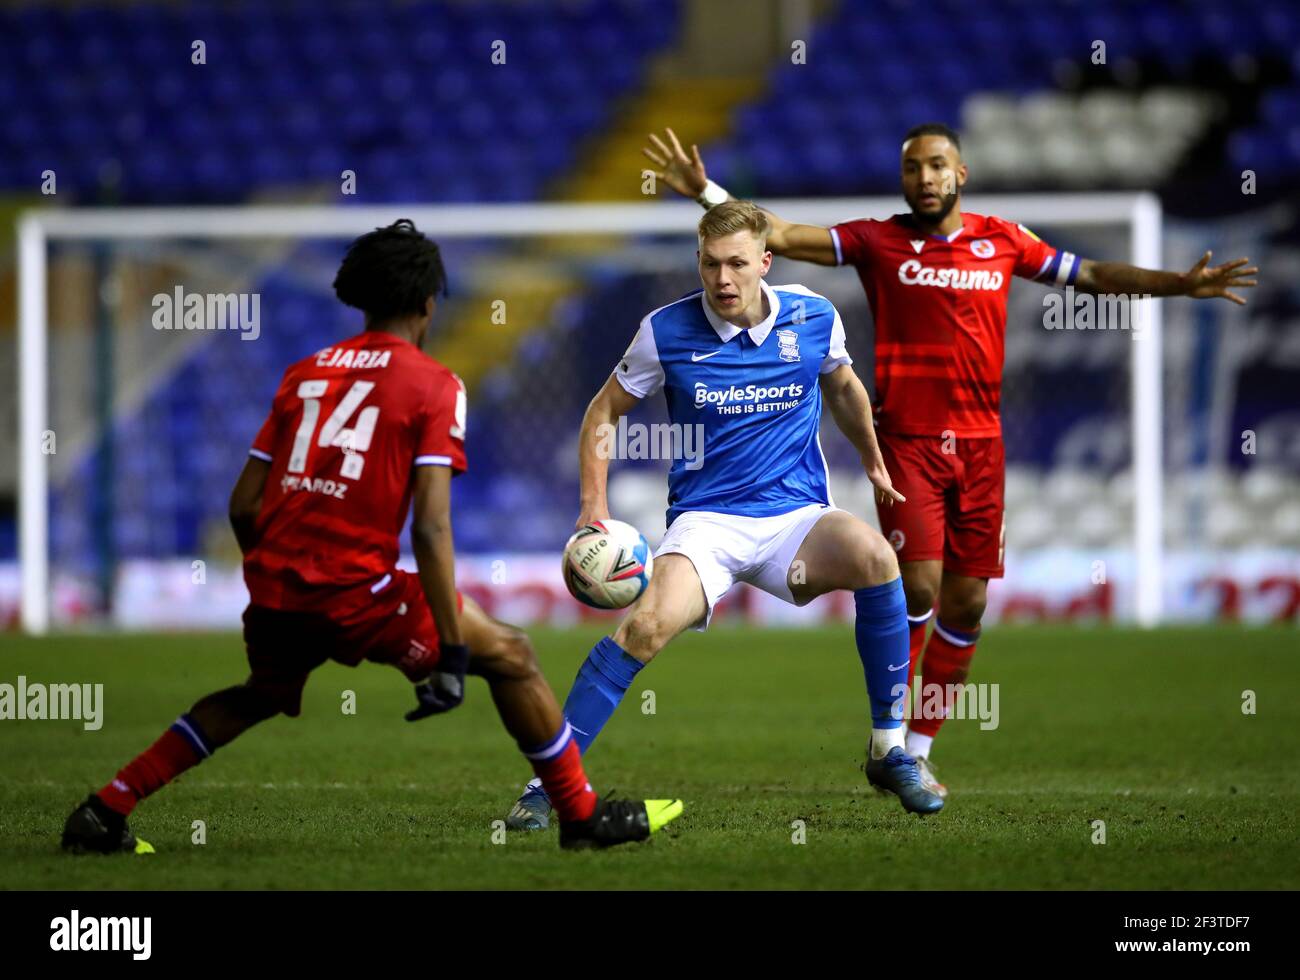 Birmingham City's Sam Cosgrove (centre) battles for the ball with Reading's Liam Moore (right) and Ovie Ejaria during the Sky Bet Championship match at St Andrew's Trillion Trophy Stadium, Birmingham. Picture date: Wednesday March 17, 2021. Stock Photo